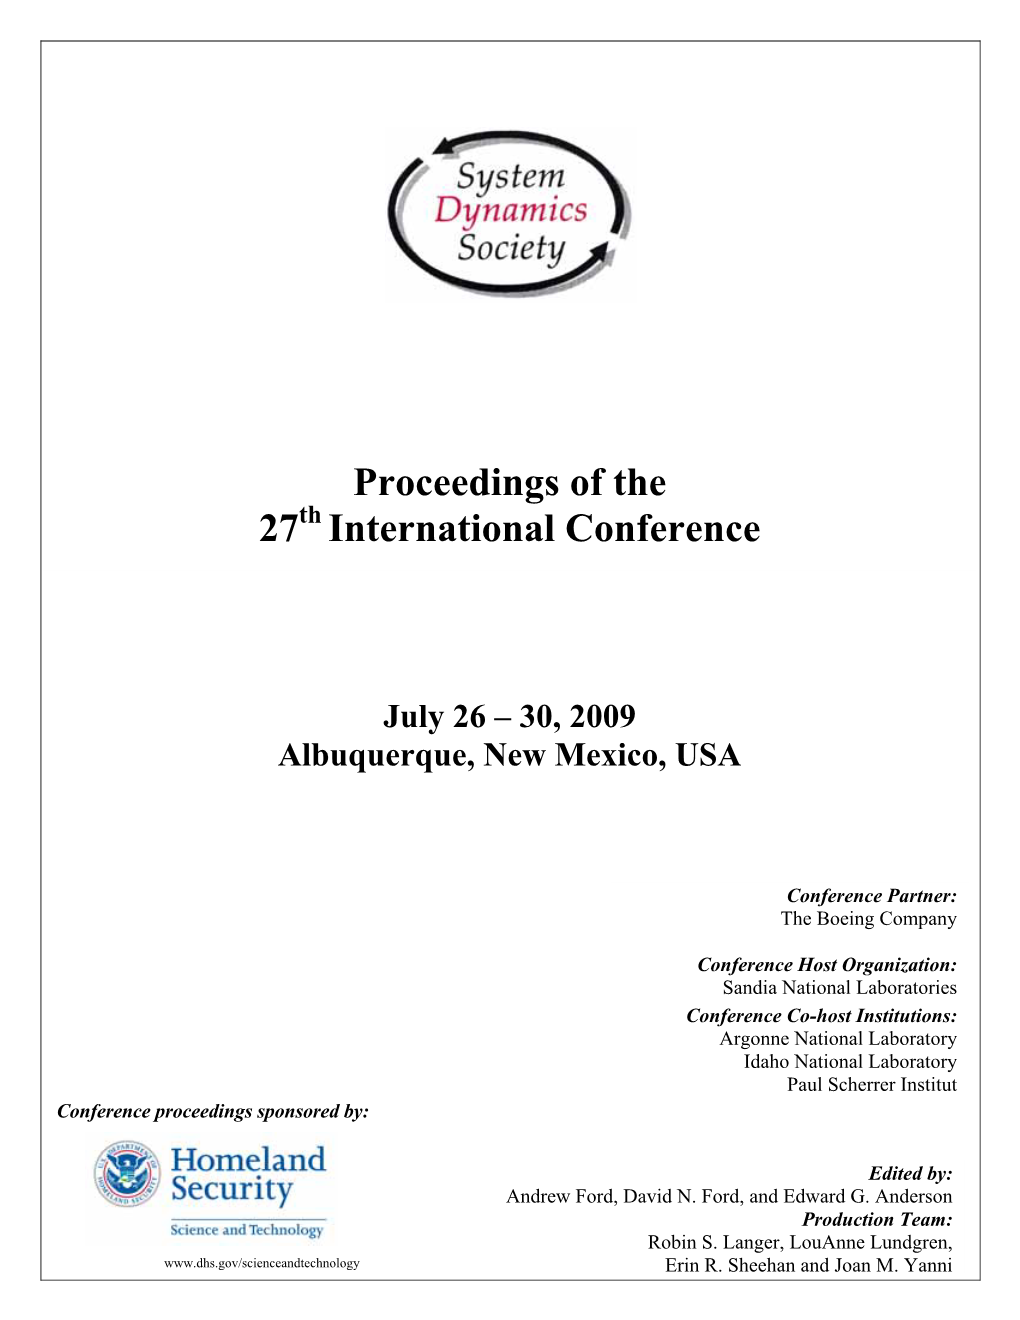 Proceedings of the 27 International Conference